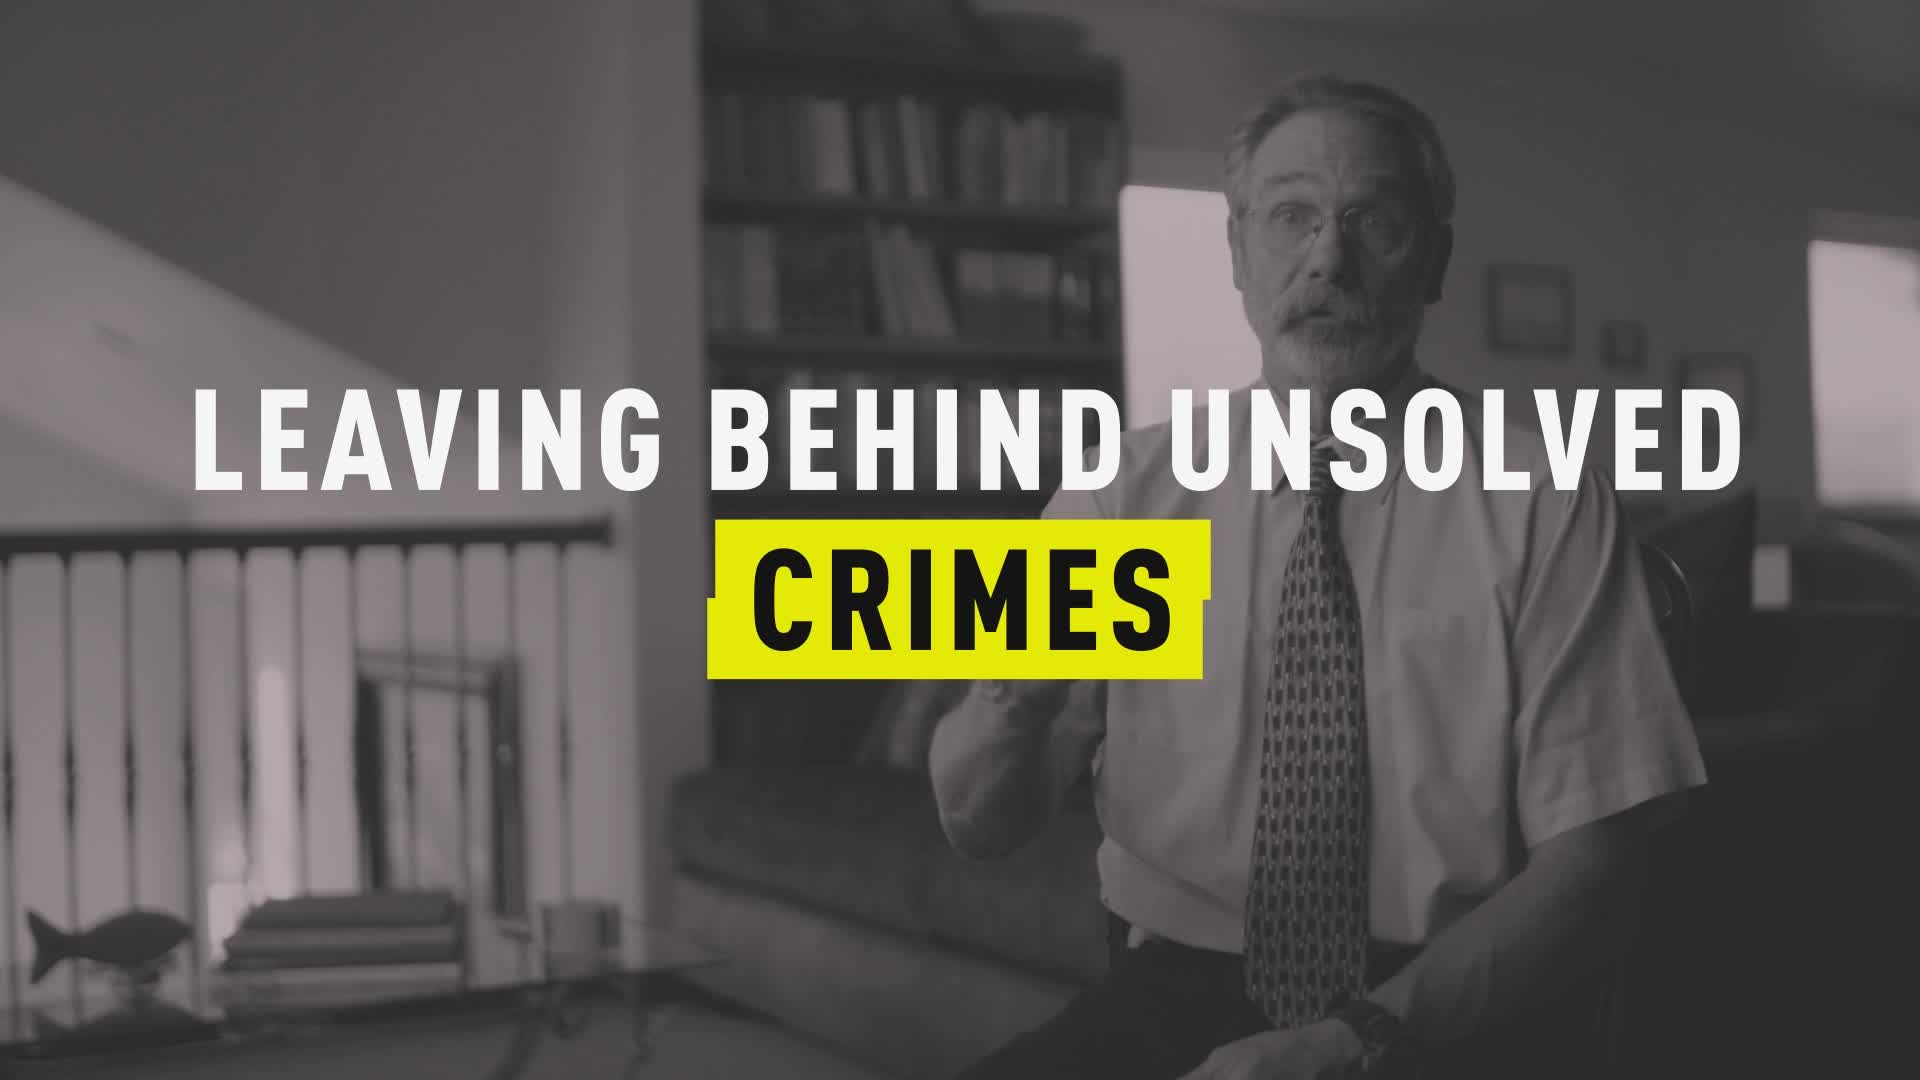 Method of a Serial Killer: Leaving Behind Unsolved Crimes